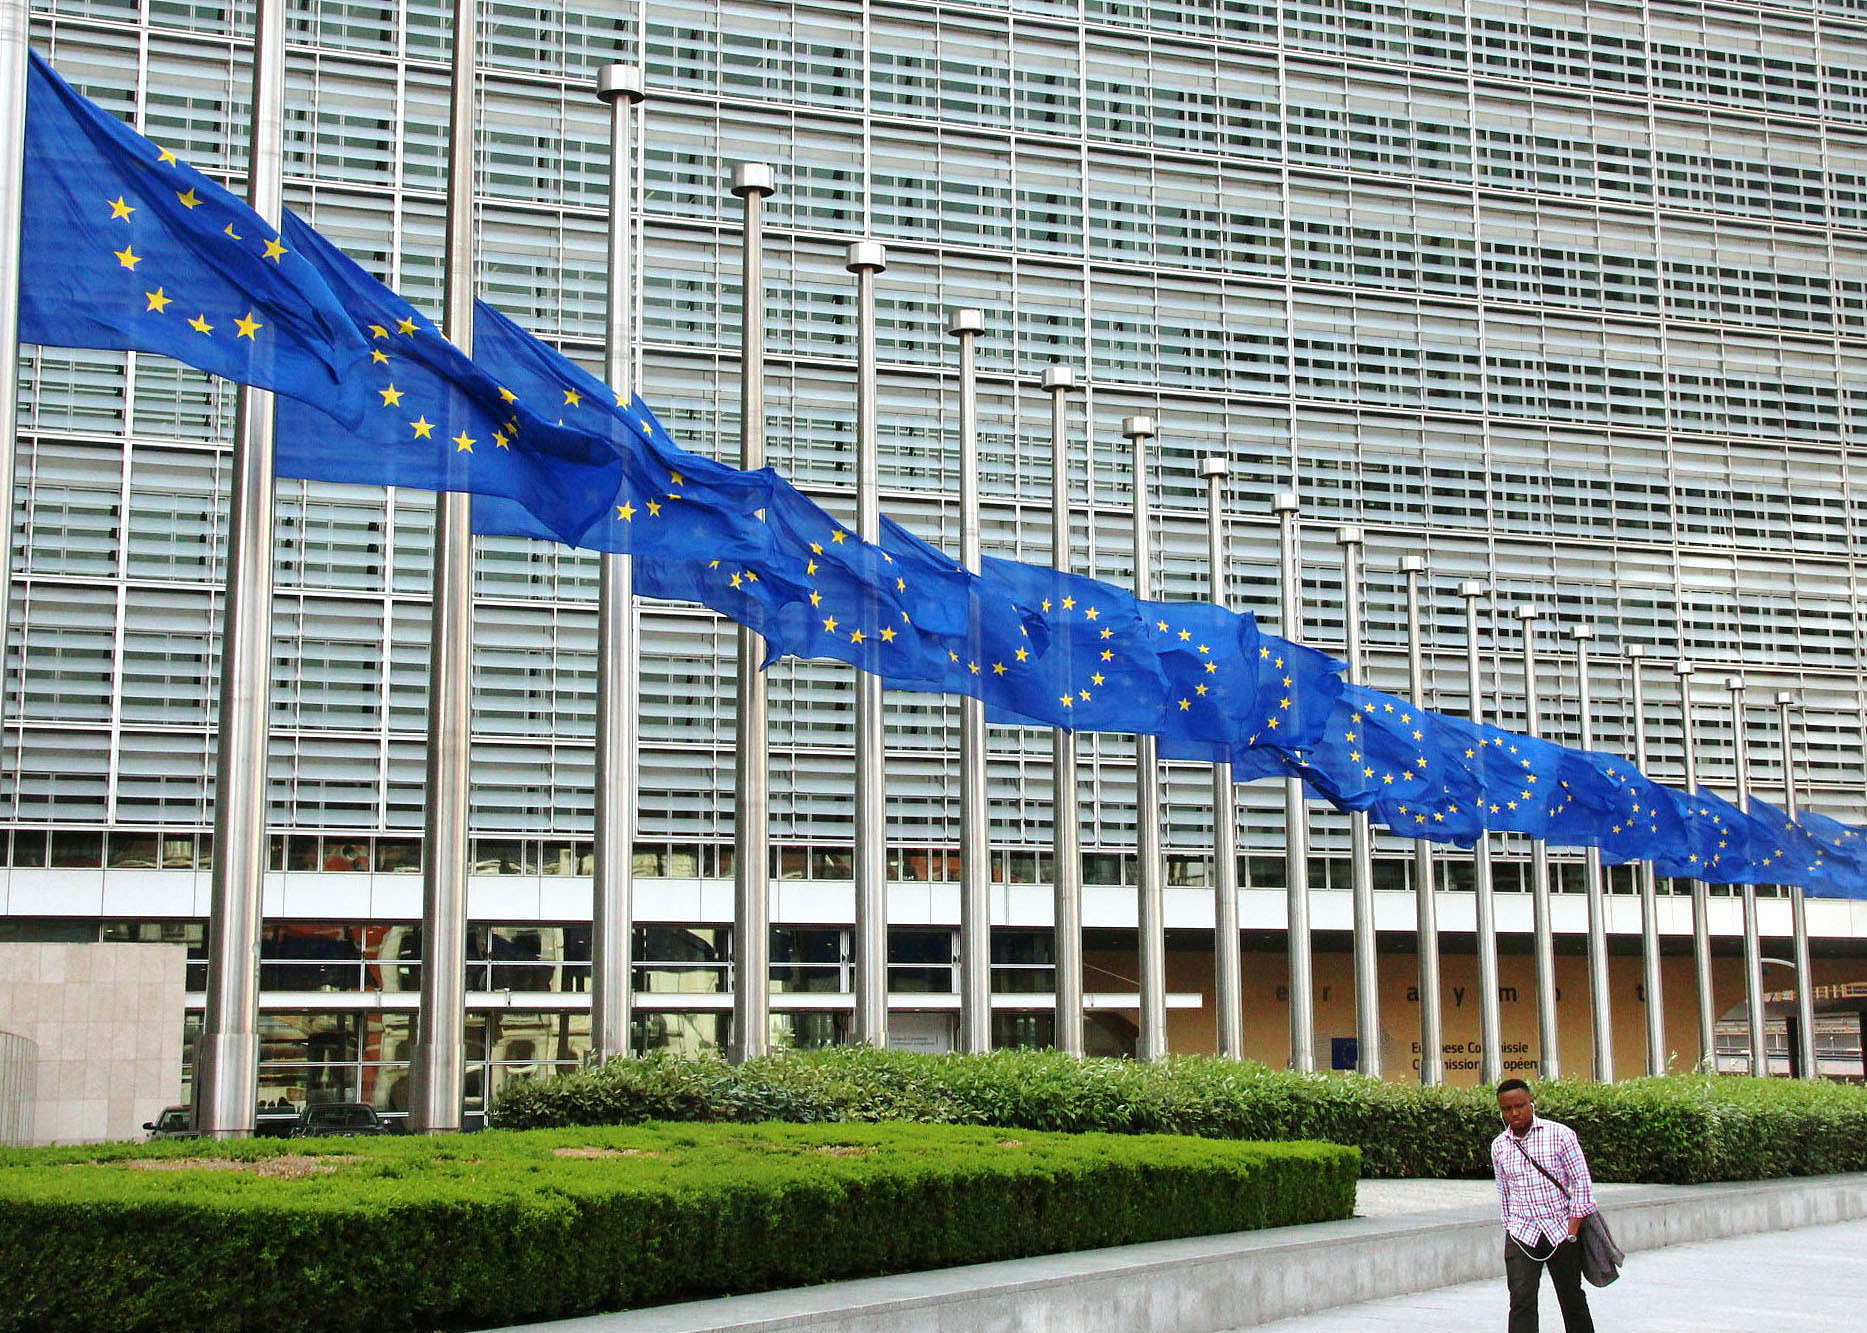 The new EU bill is passed, and the era of "carbon neutrality" labels may come to an end